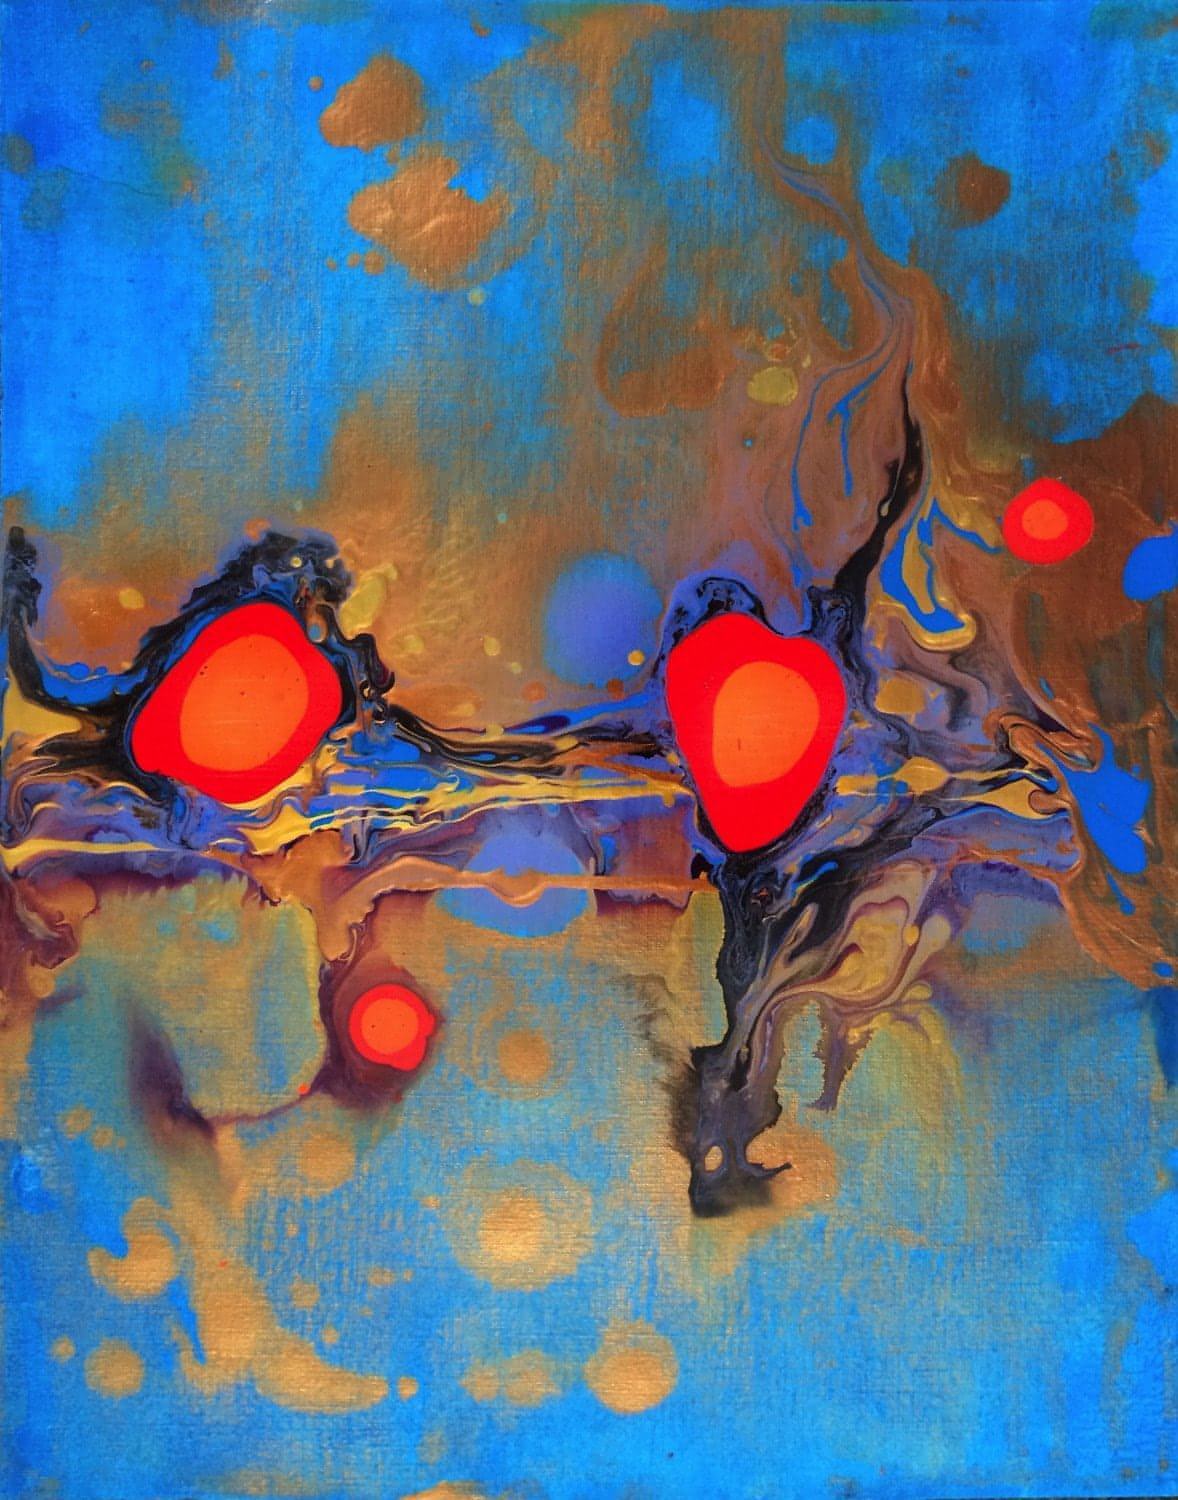 Fire Poppies 2 - Gallery 327